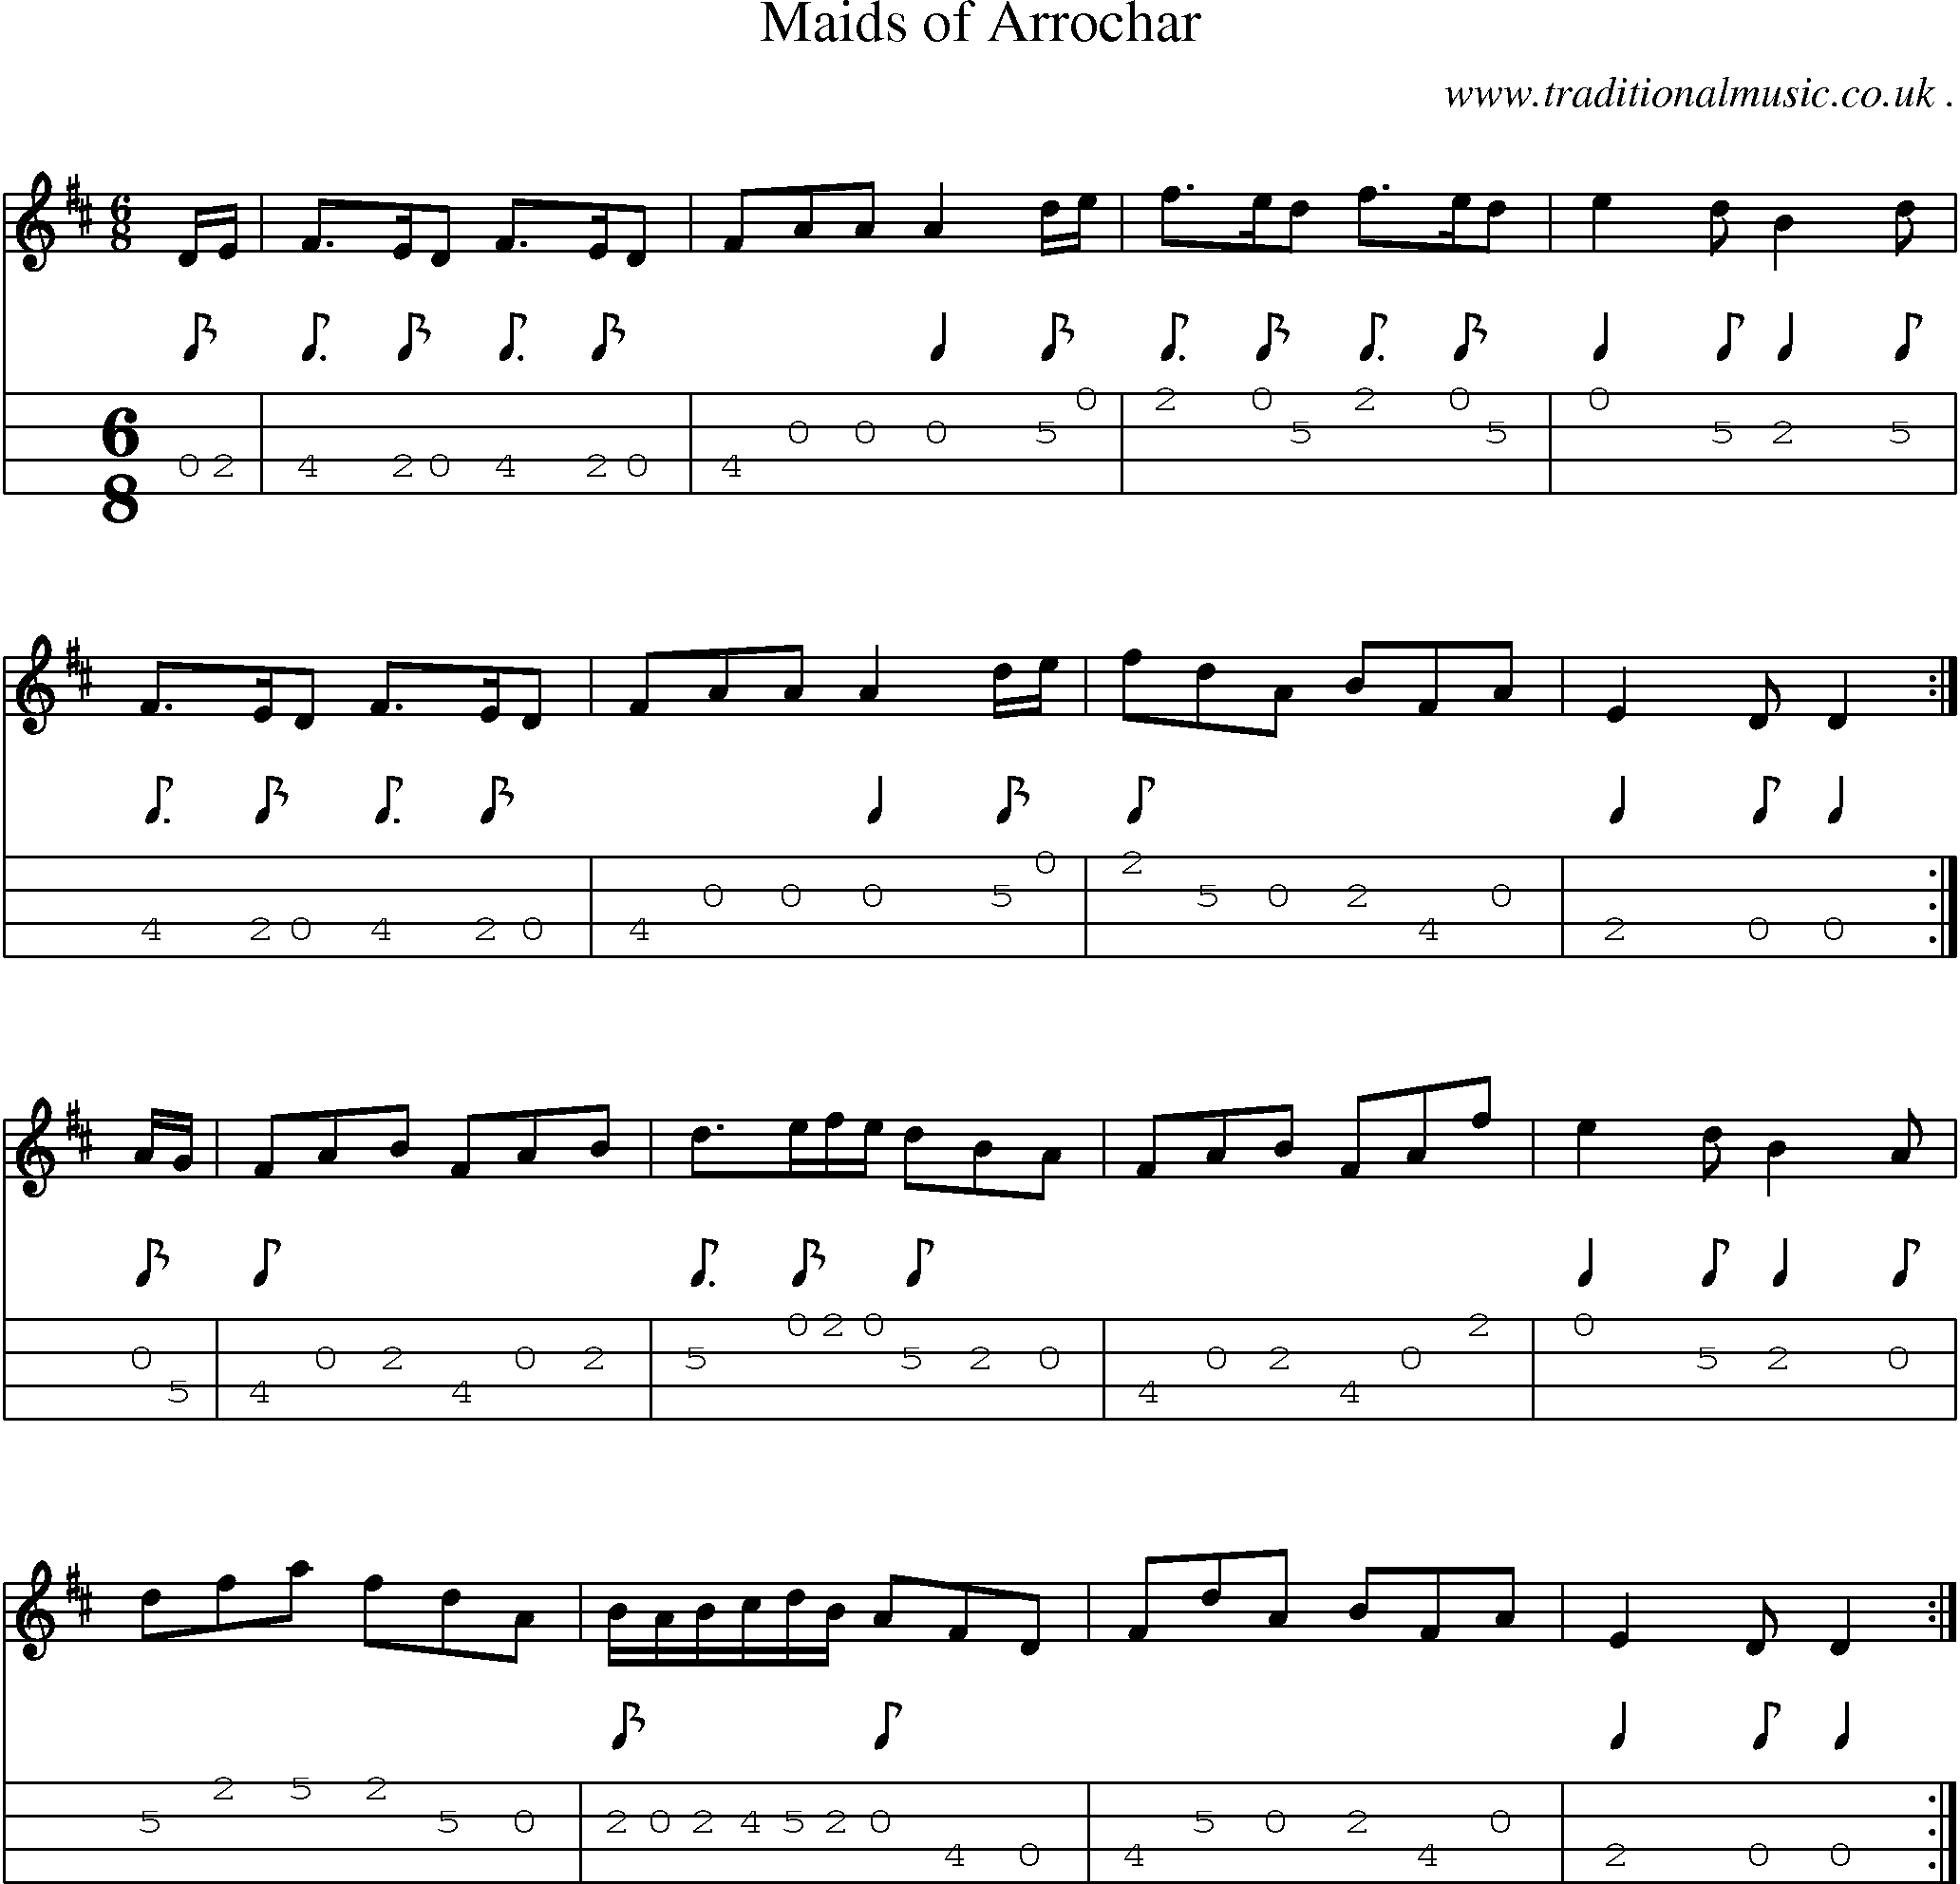 Sheet-music  score, Chords and Mandolin Tabs for Maids Of Arrochar